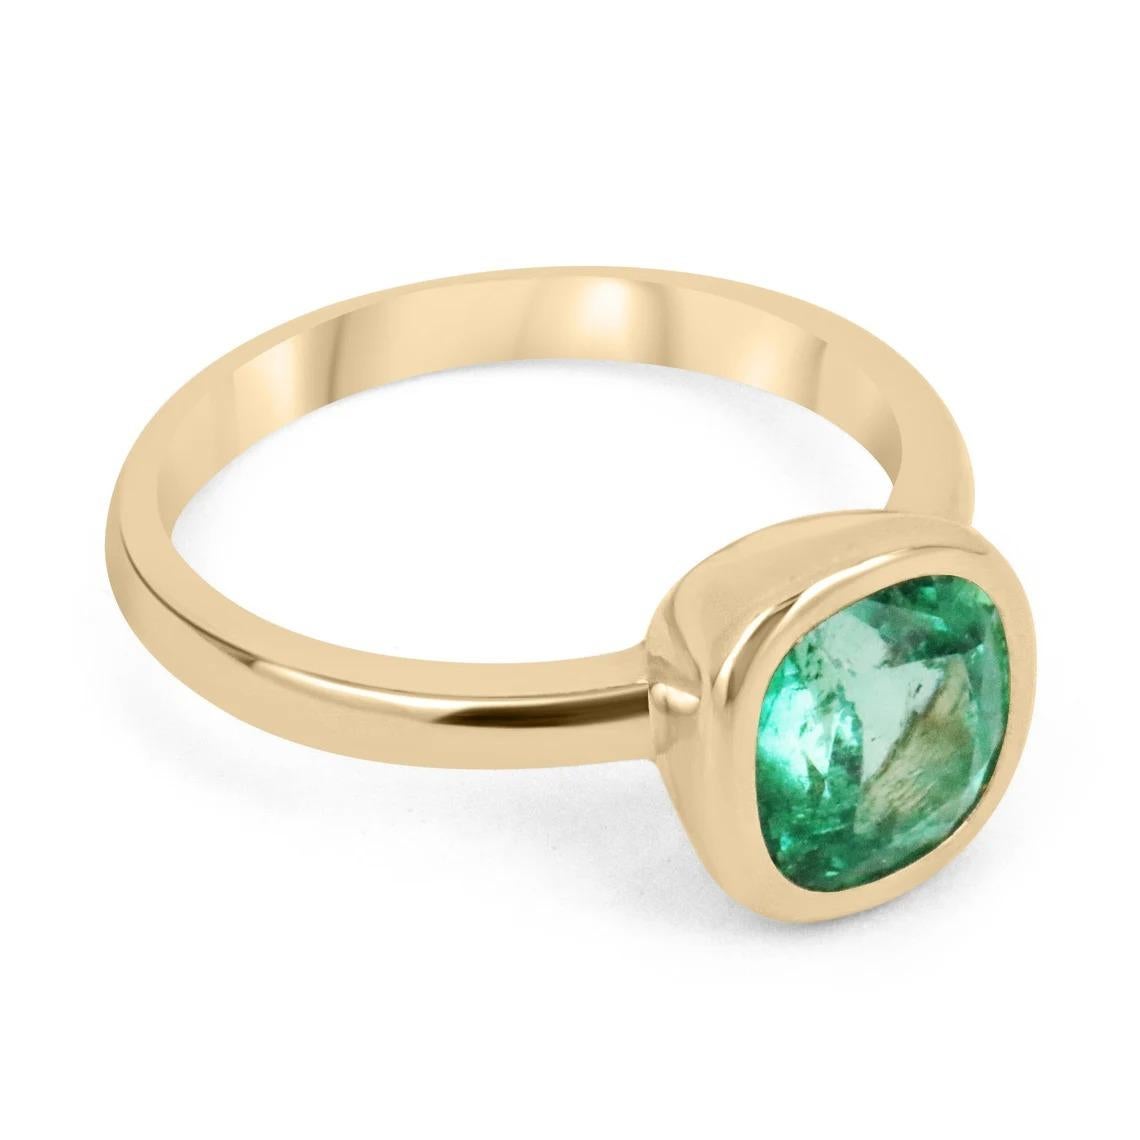 This ring is not for the faint of heart! Displayed is a medium Colombian emerald solitaire cushion-cut engagement/right-hand ring in 14K yellow gold. This gorgeous solitaire ring carries a full 1.96-carat emerald in a golden bezel setting. The